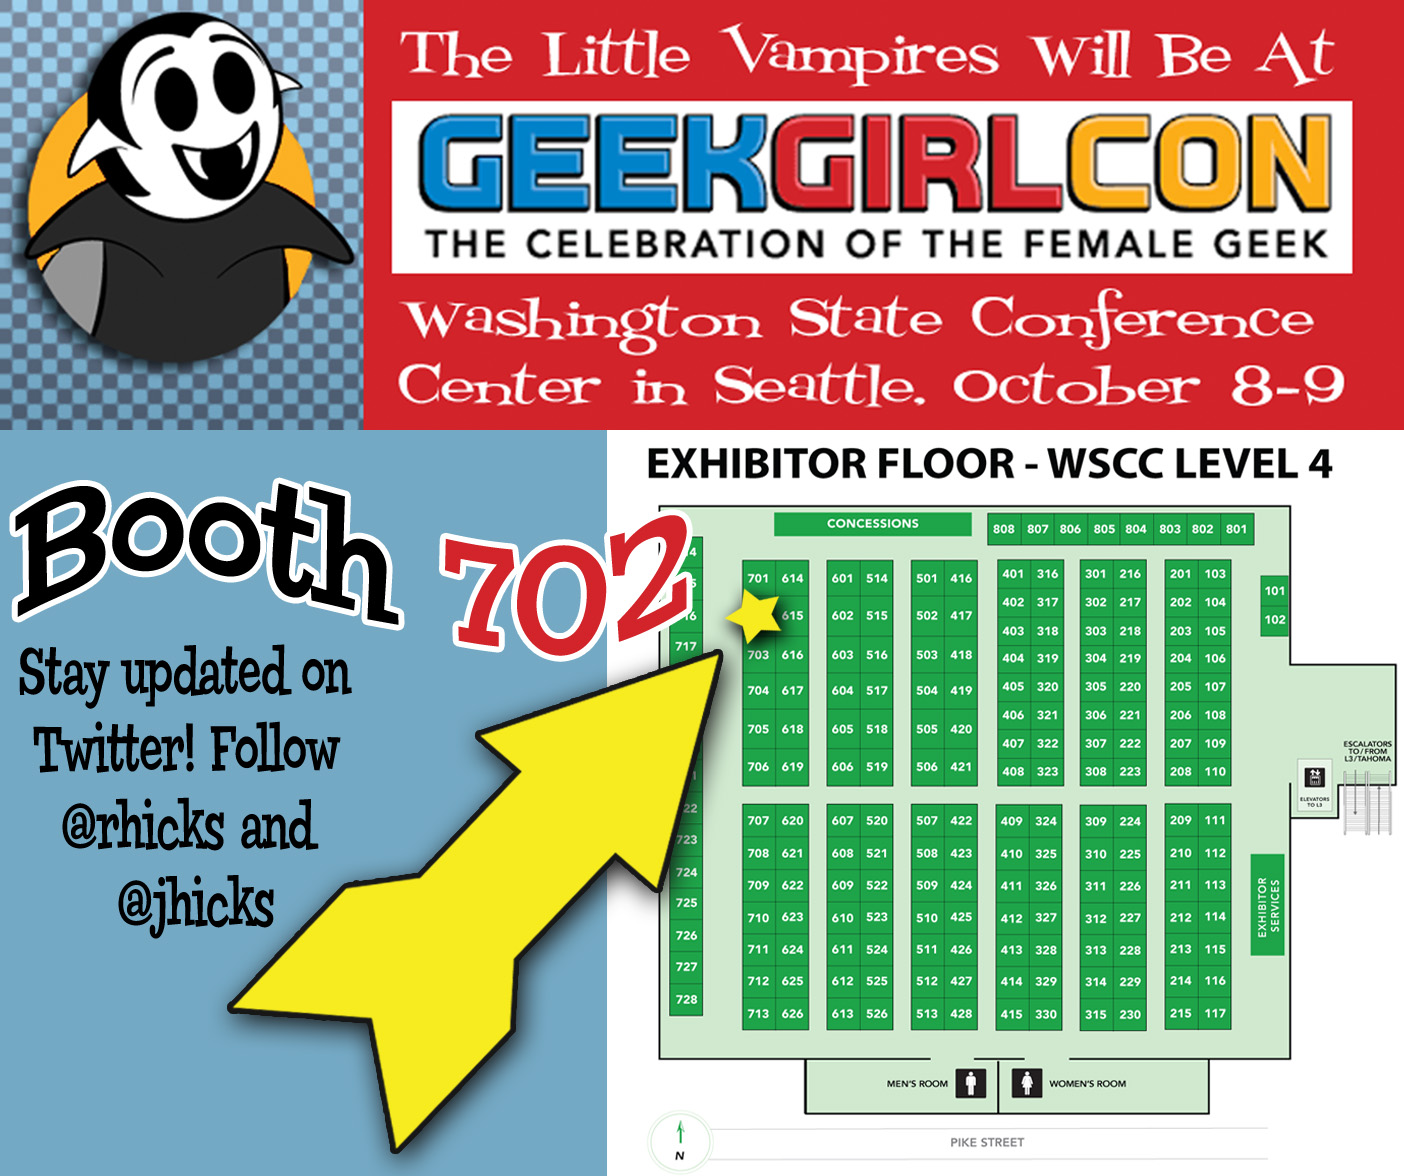 Geek Girl Con 2016 exhibitor floor map with the Little Vampires booth highlighted